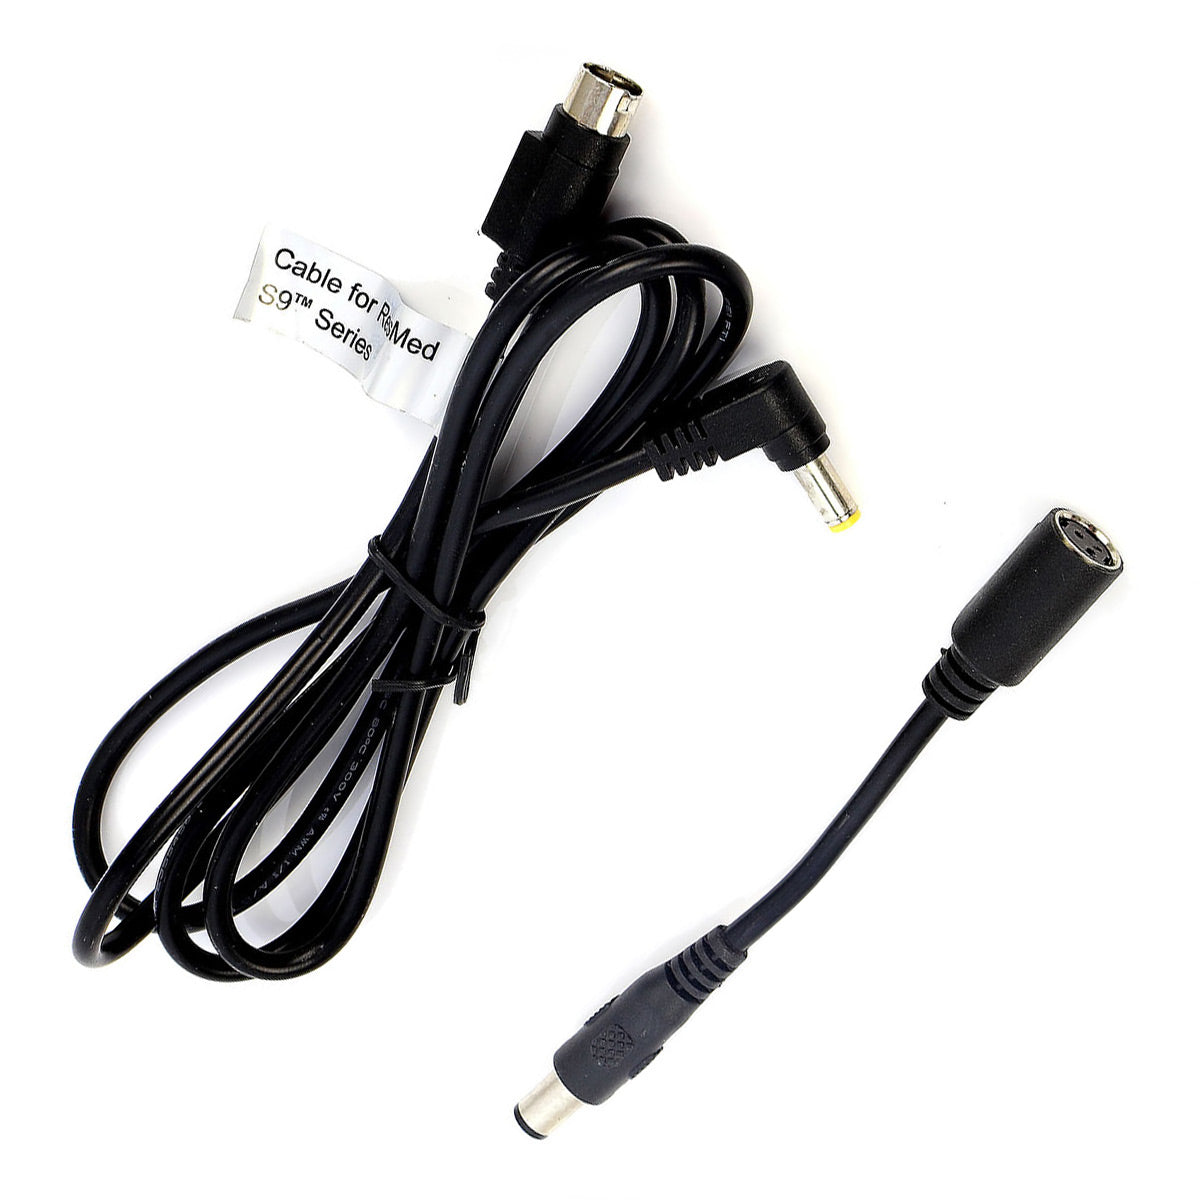 ResMed S9 Series Adapter Cables for Pilot 24 Lite Battery Packs